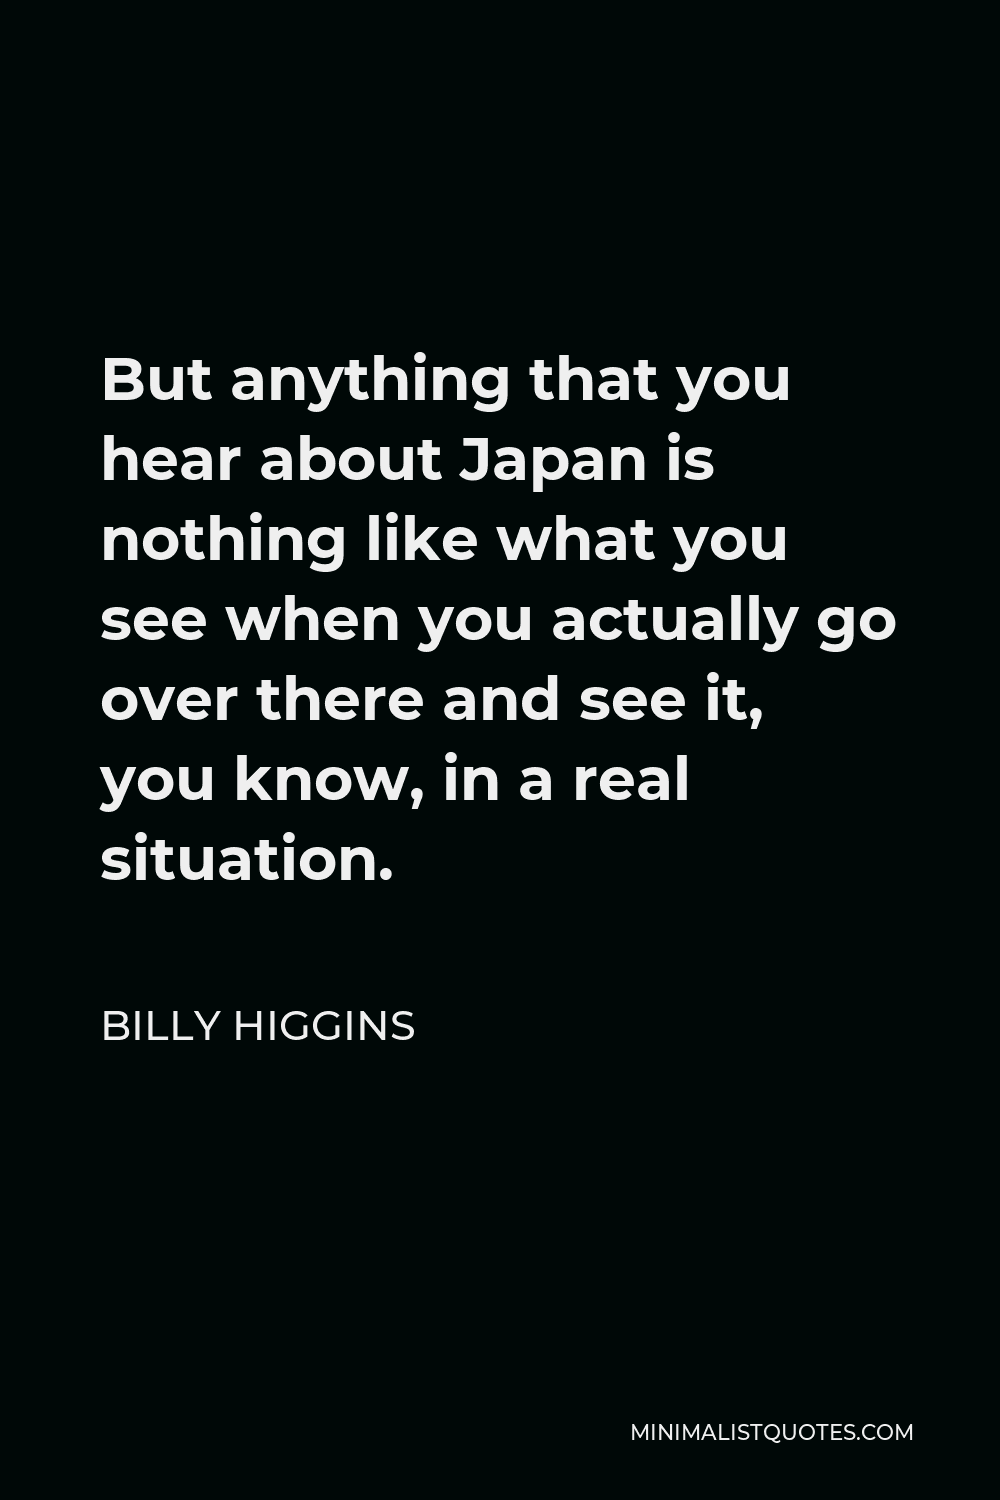 Billy Higgins Quote - But anything that you hear about Japan is nothing like what you see when you actually go over there and see it, you know, in a real situation.